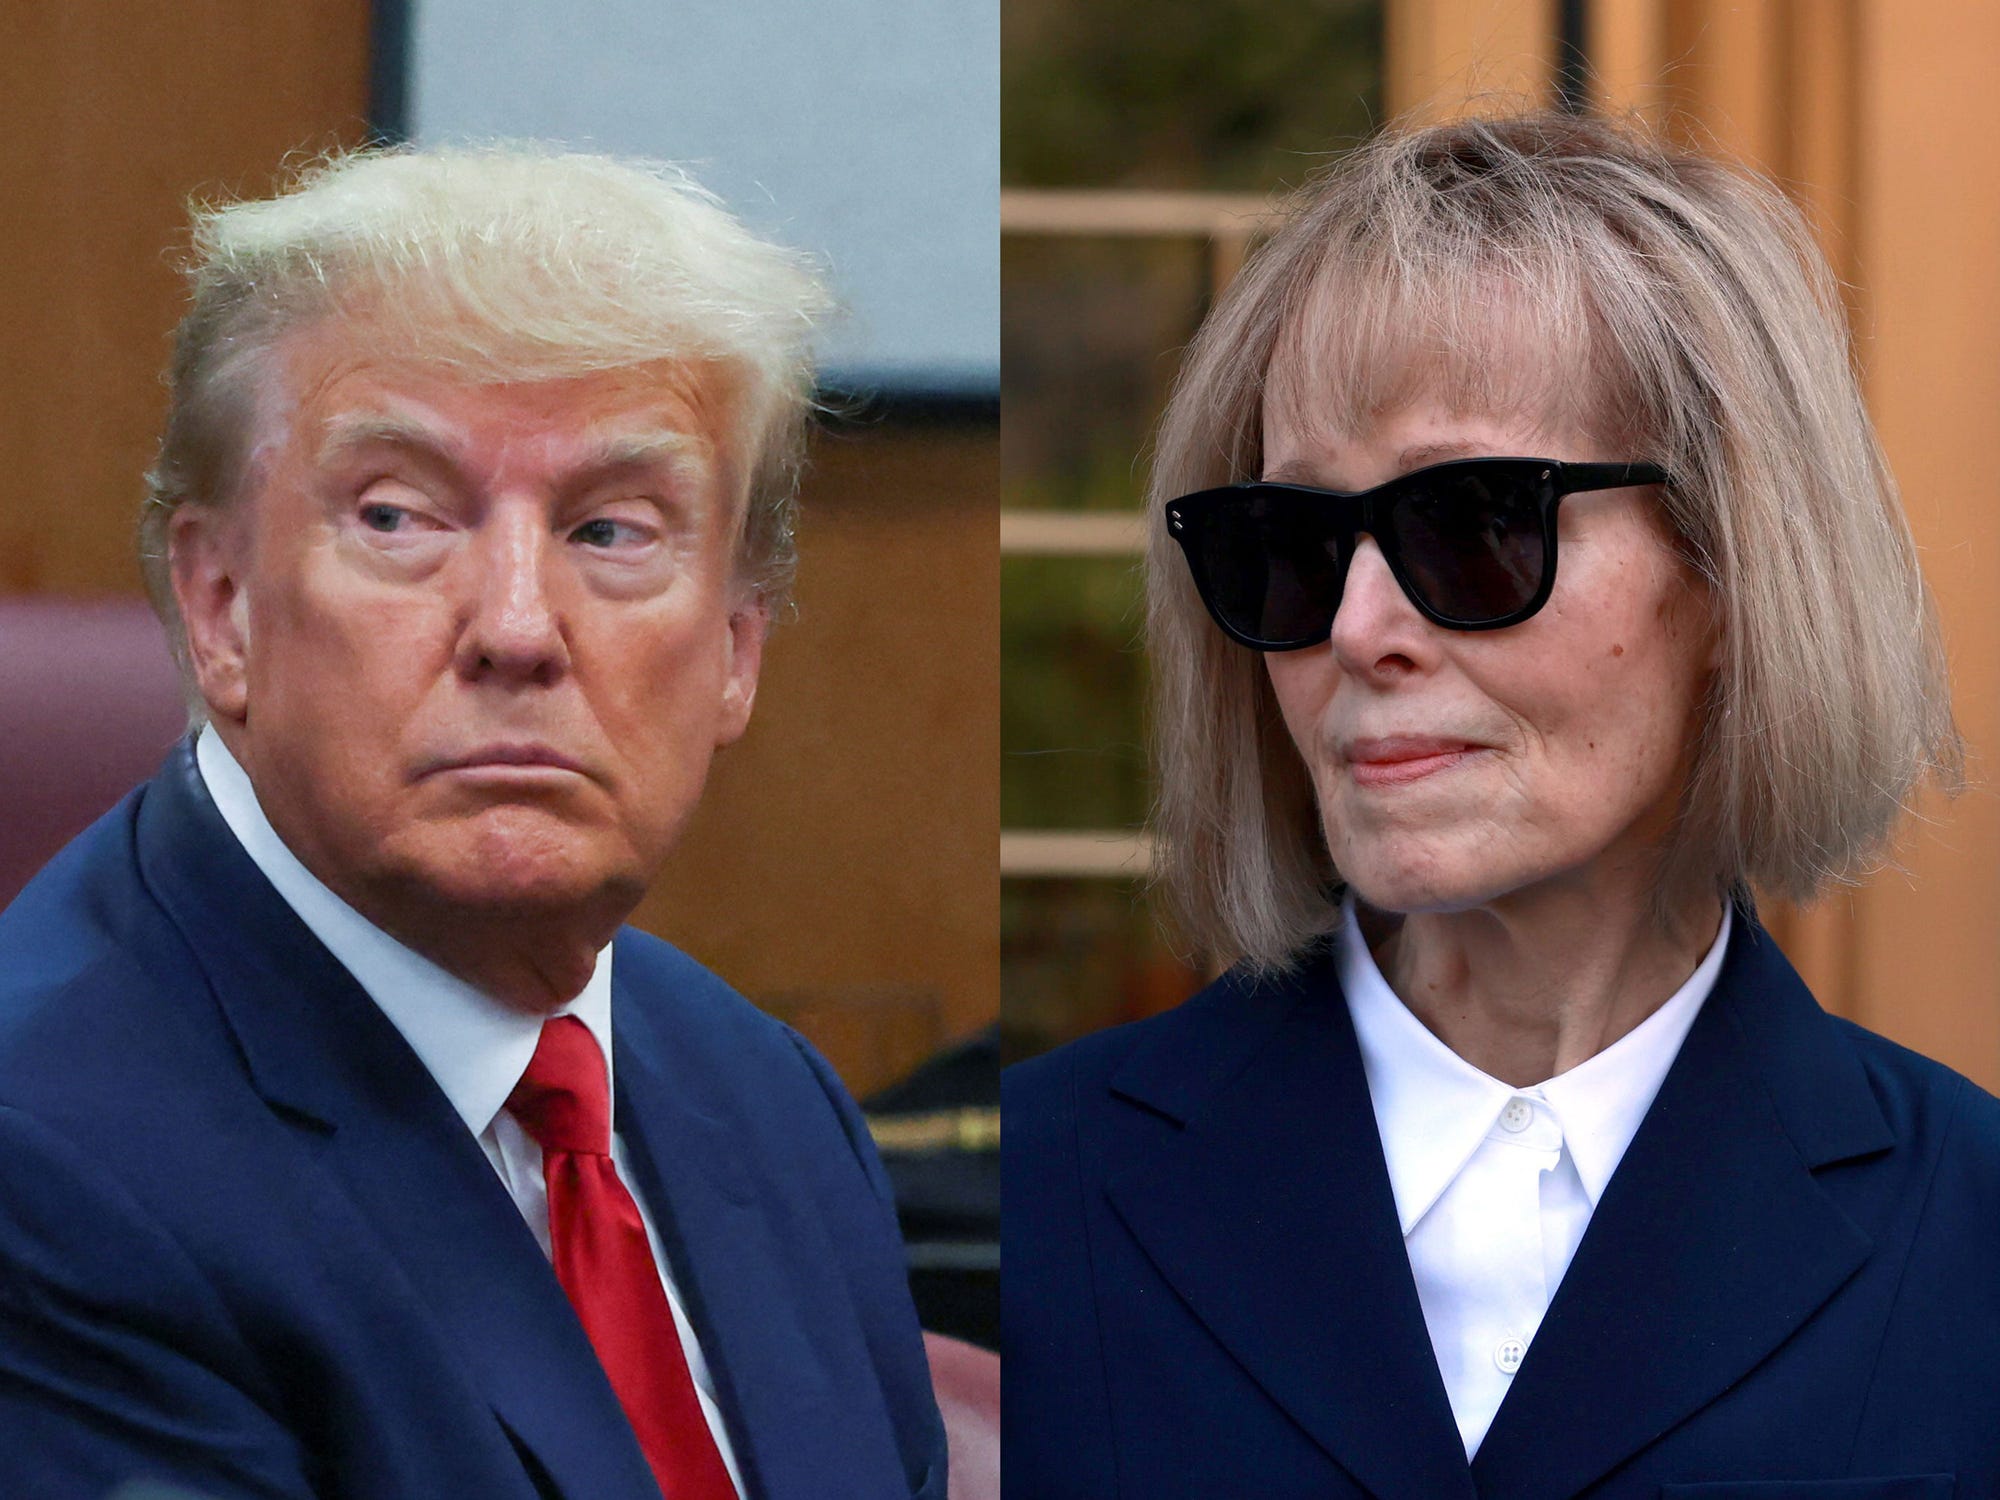 Trump claimed his E. Jean Carroll defamations were the best thing that ever happened to her. Here's how the grotesque tactic met its end.